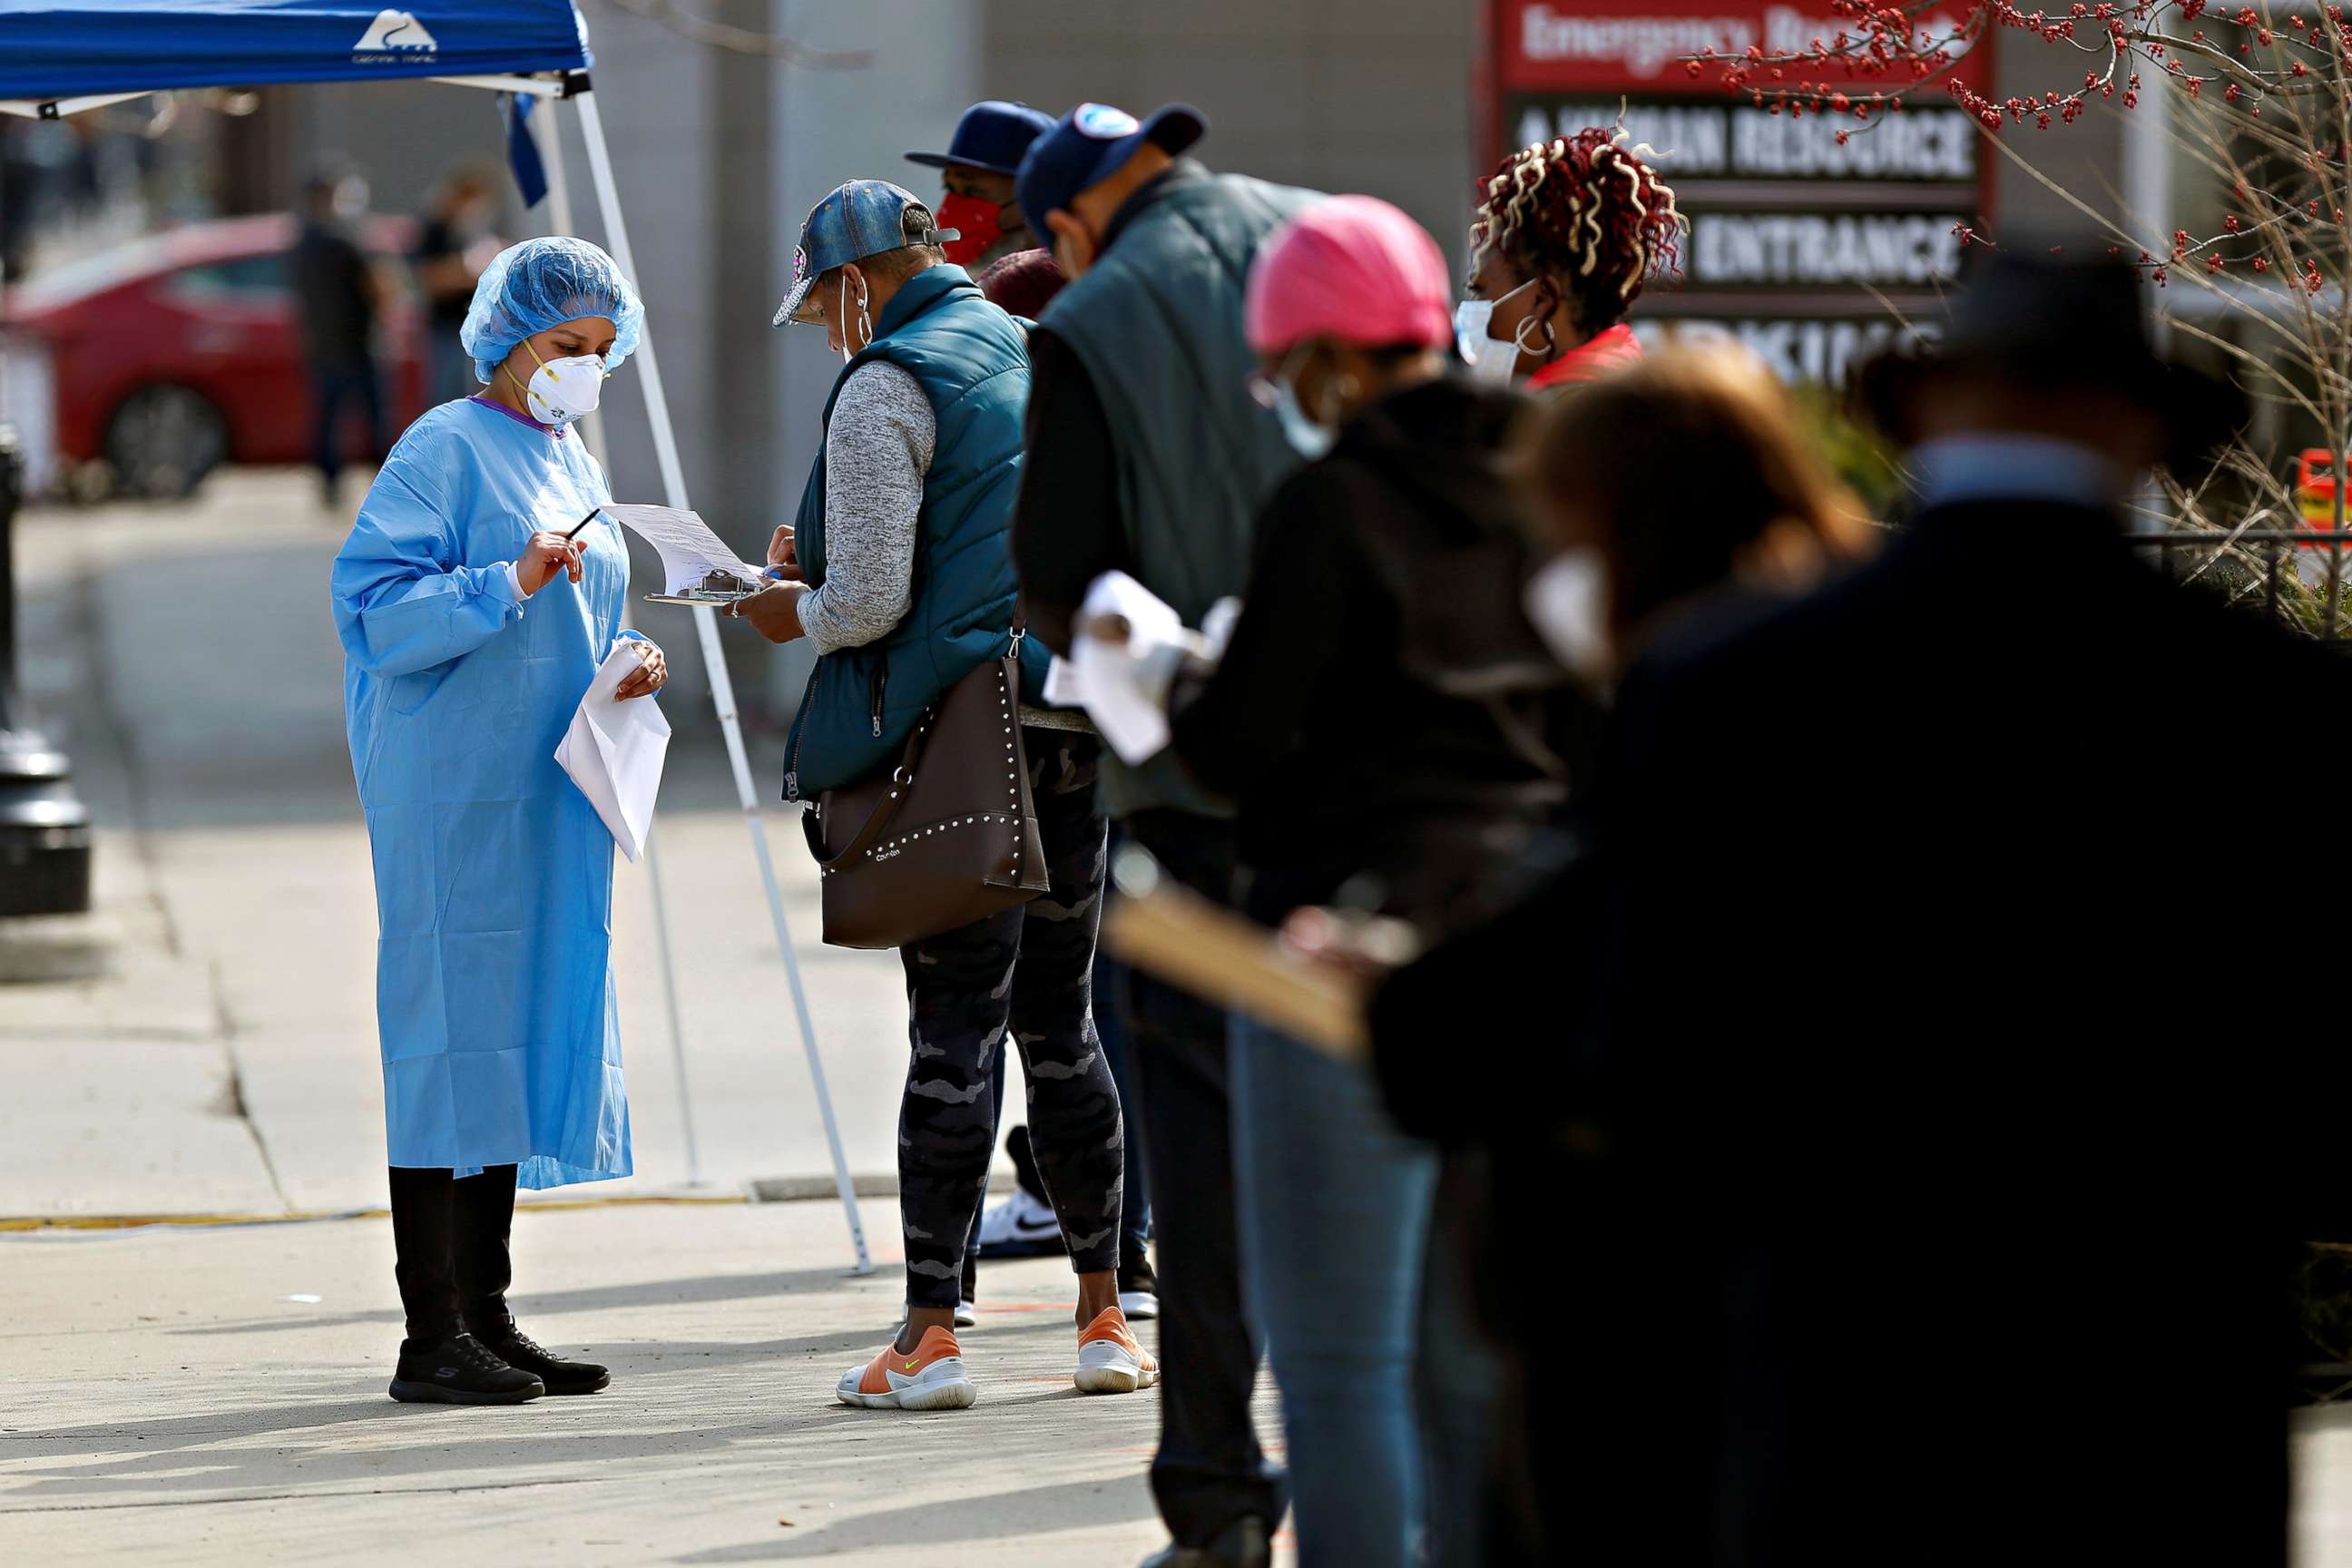 PHOTO: People wait in line to for coronavirus testing testing during outside Roseland Community Hospital in Chicago, April 7, 2020.